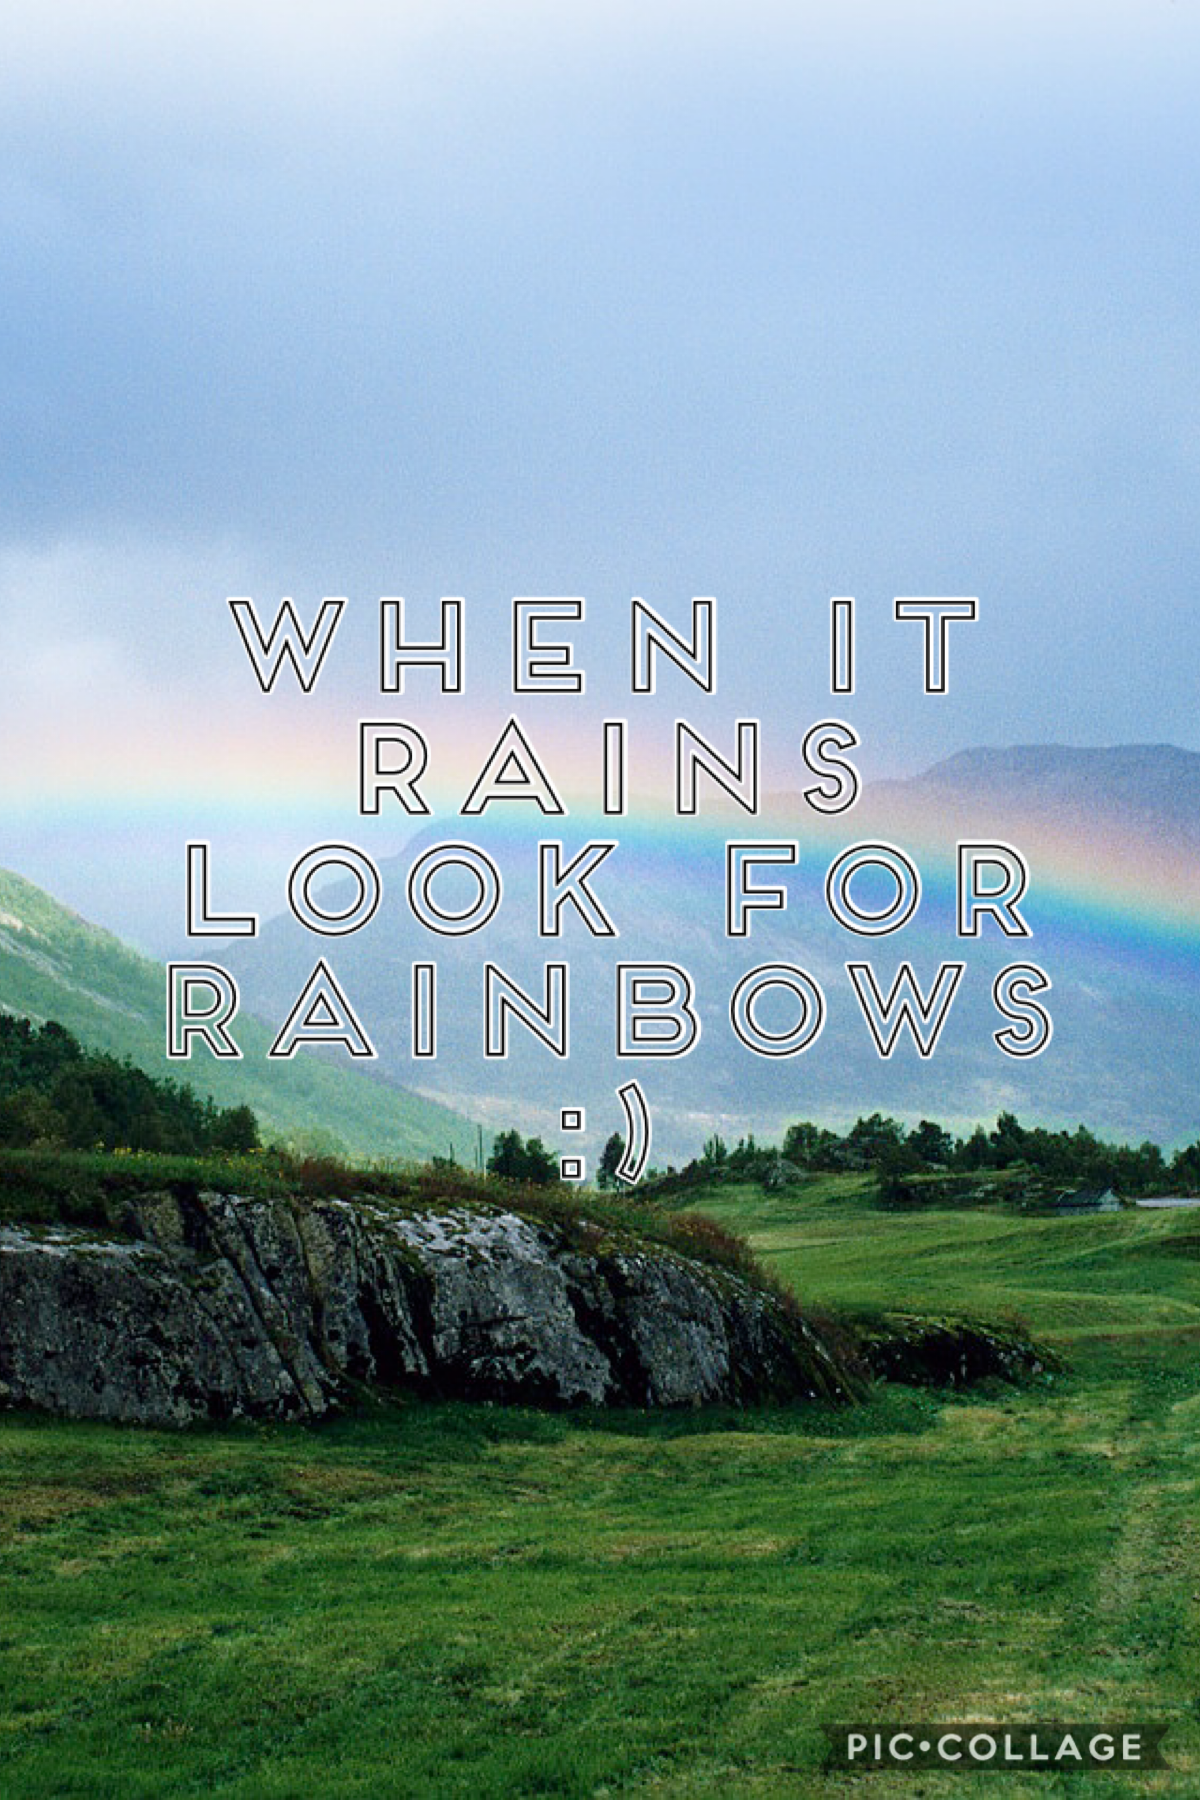 “When it rains look for rainbows” :)